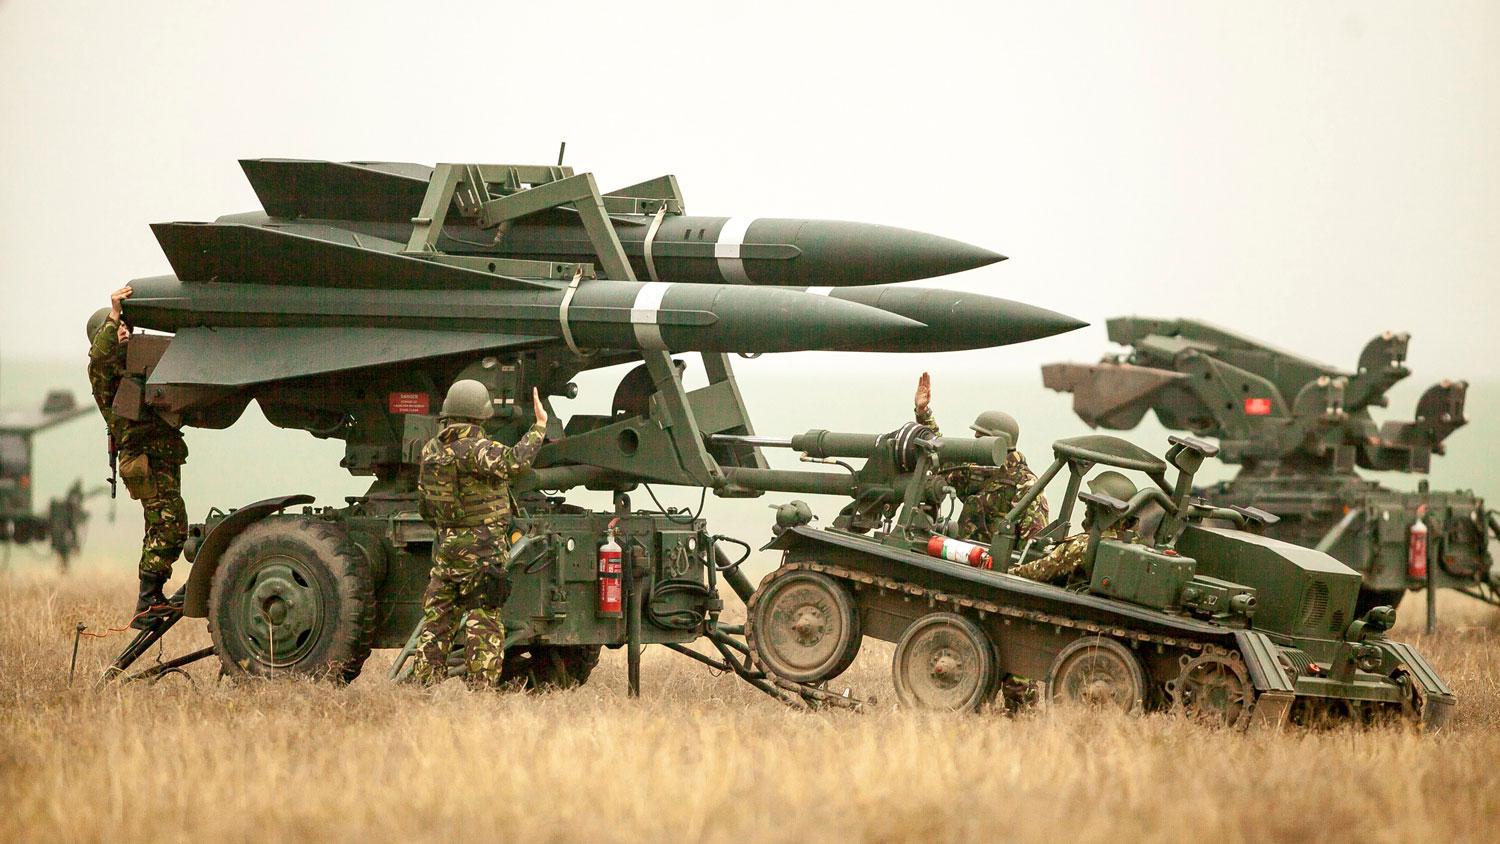 Romanian Army soldiers deploy a ground-to-air missile launch pad during a joint military exercise with the US Army.